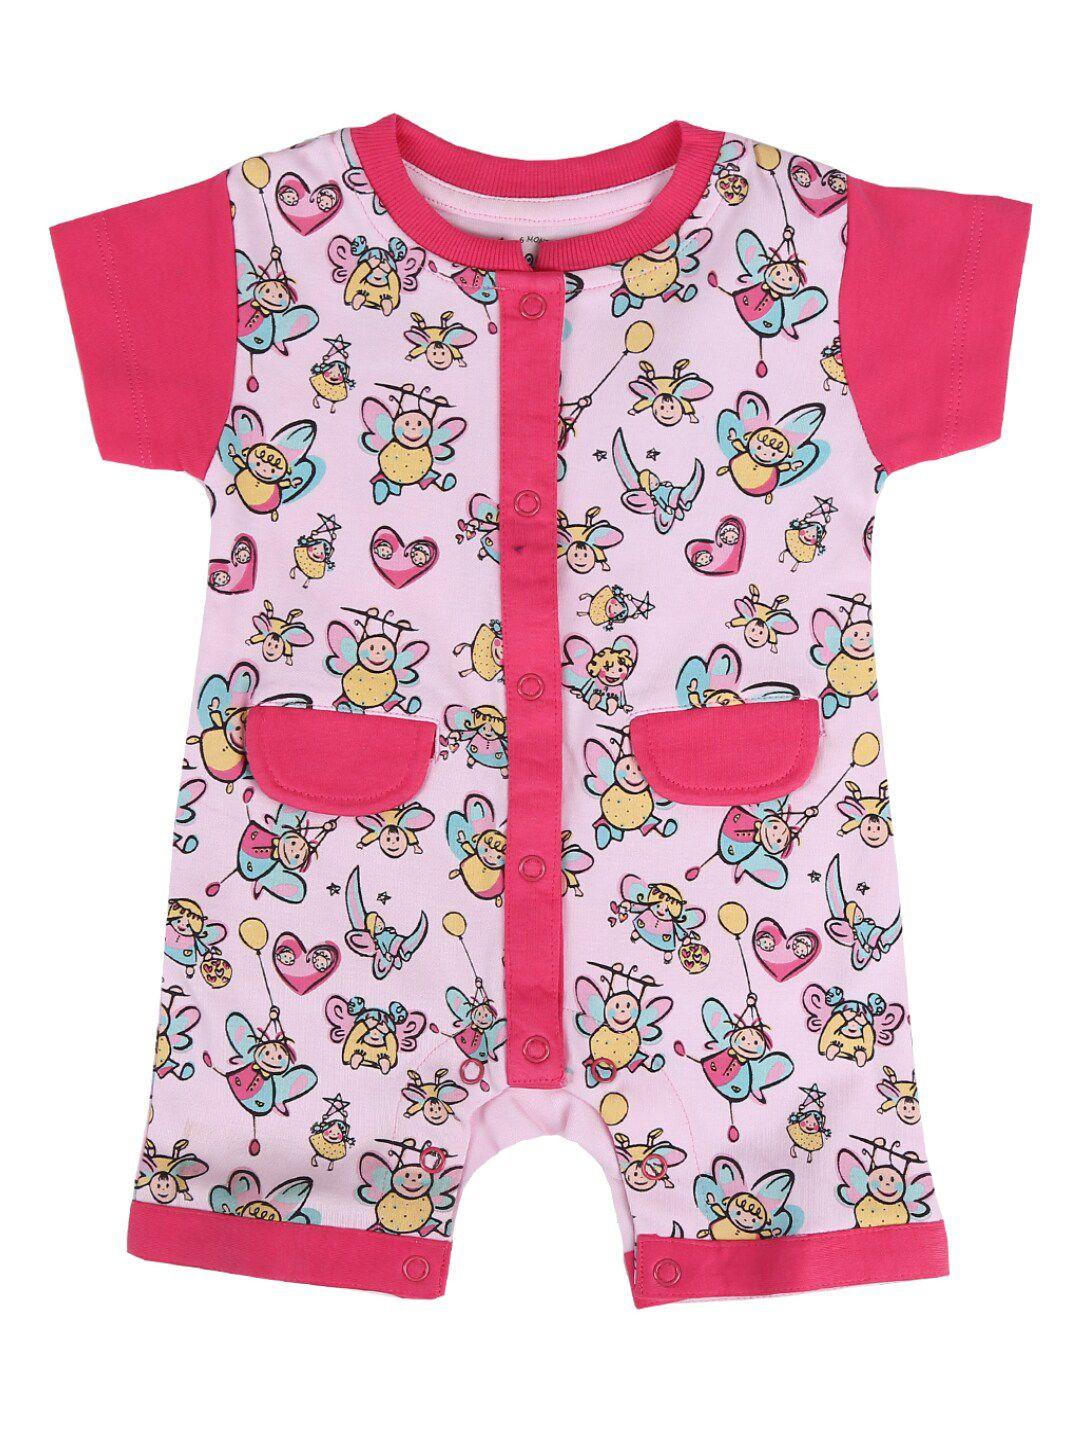 v-mart kids pink & red printed pure cotton rompers